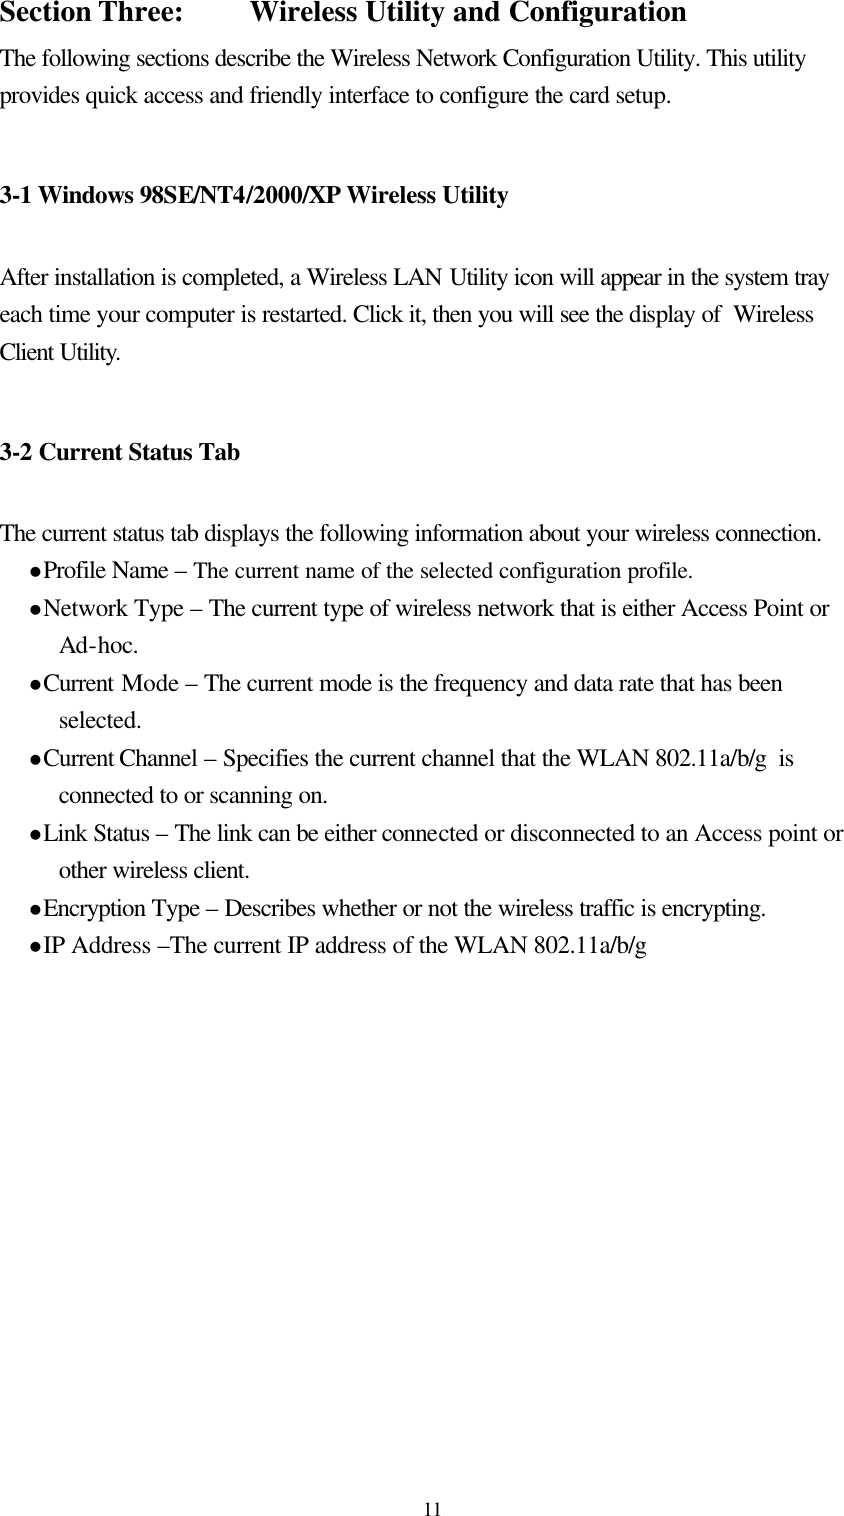  11Section Three:    Wireless Utility and Configuration The following sections describe the Wireless Network Configuration Utility. This utility provides quick access and friendly interface to configure the card setup.  3-1 Windows 98SE/NT4/2000/XP Wireless Utility   After installation is completed, a Wireless LAN Utility icon will appear in the system tray each time your computer is restarted. Click it, then you will see the display of  Wireless Client Utility.   3-2 Current Status Tab  The current status tab displays the following information about your wireless connection. l Profile Name – The current name of the selected configuration profile. l Network Type – The current type of wireless network that is either Access Point or Ad-hoc. l Current Mode – The current mode is the frequency and data rate that has been selected. l Current Channel – Specifies the current channel that the WLAN 802.11a/b/g  is connected to or scanning on. l Link Status – The link can be either connected or disconnected to an Access point or other wireless client. l Encryption Type – Describes whether or not the wireless traffic is encrypting. l IP Address –The current IP address of the WLAN 802.11a/b/g  